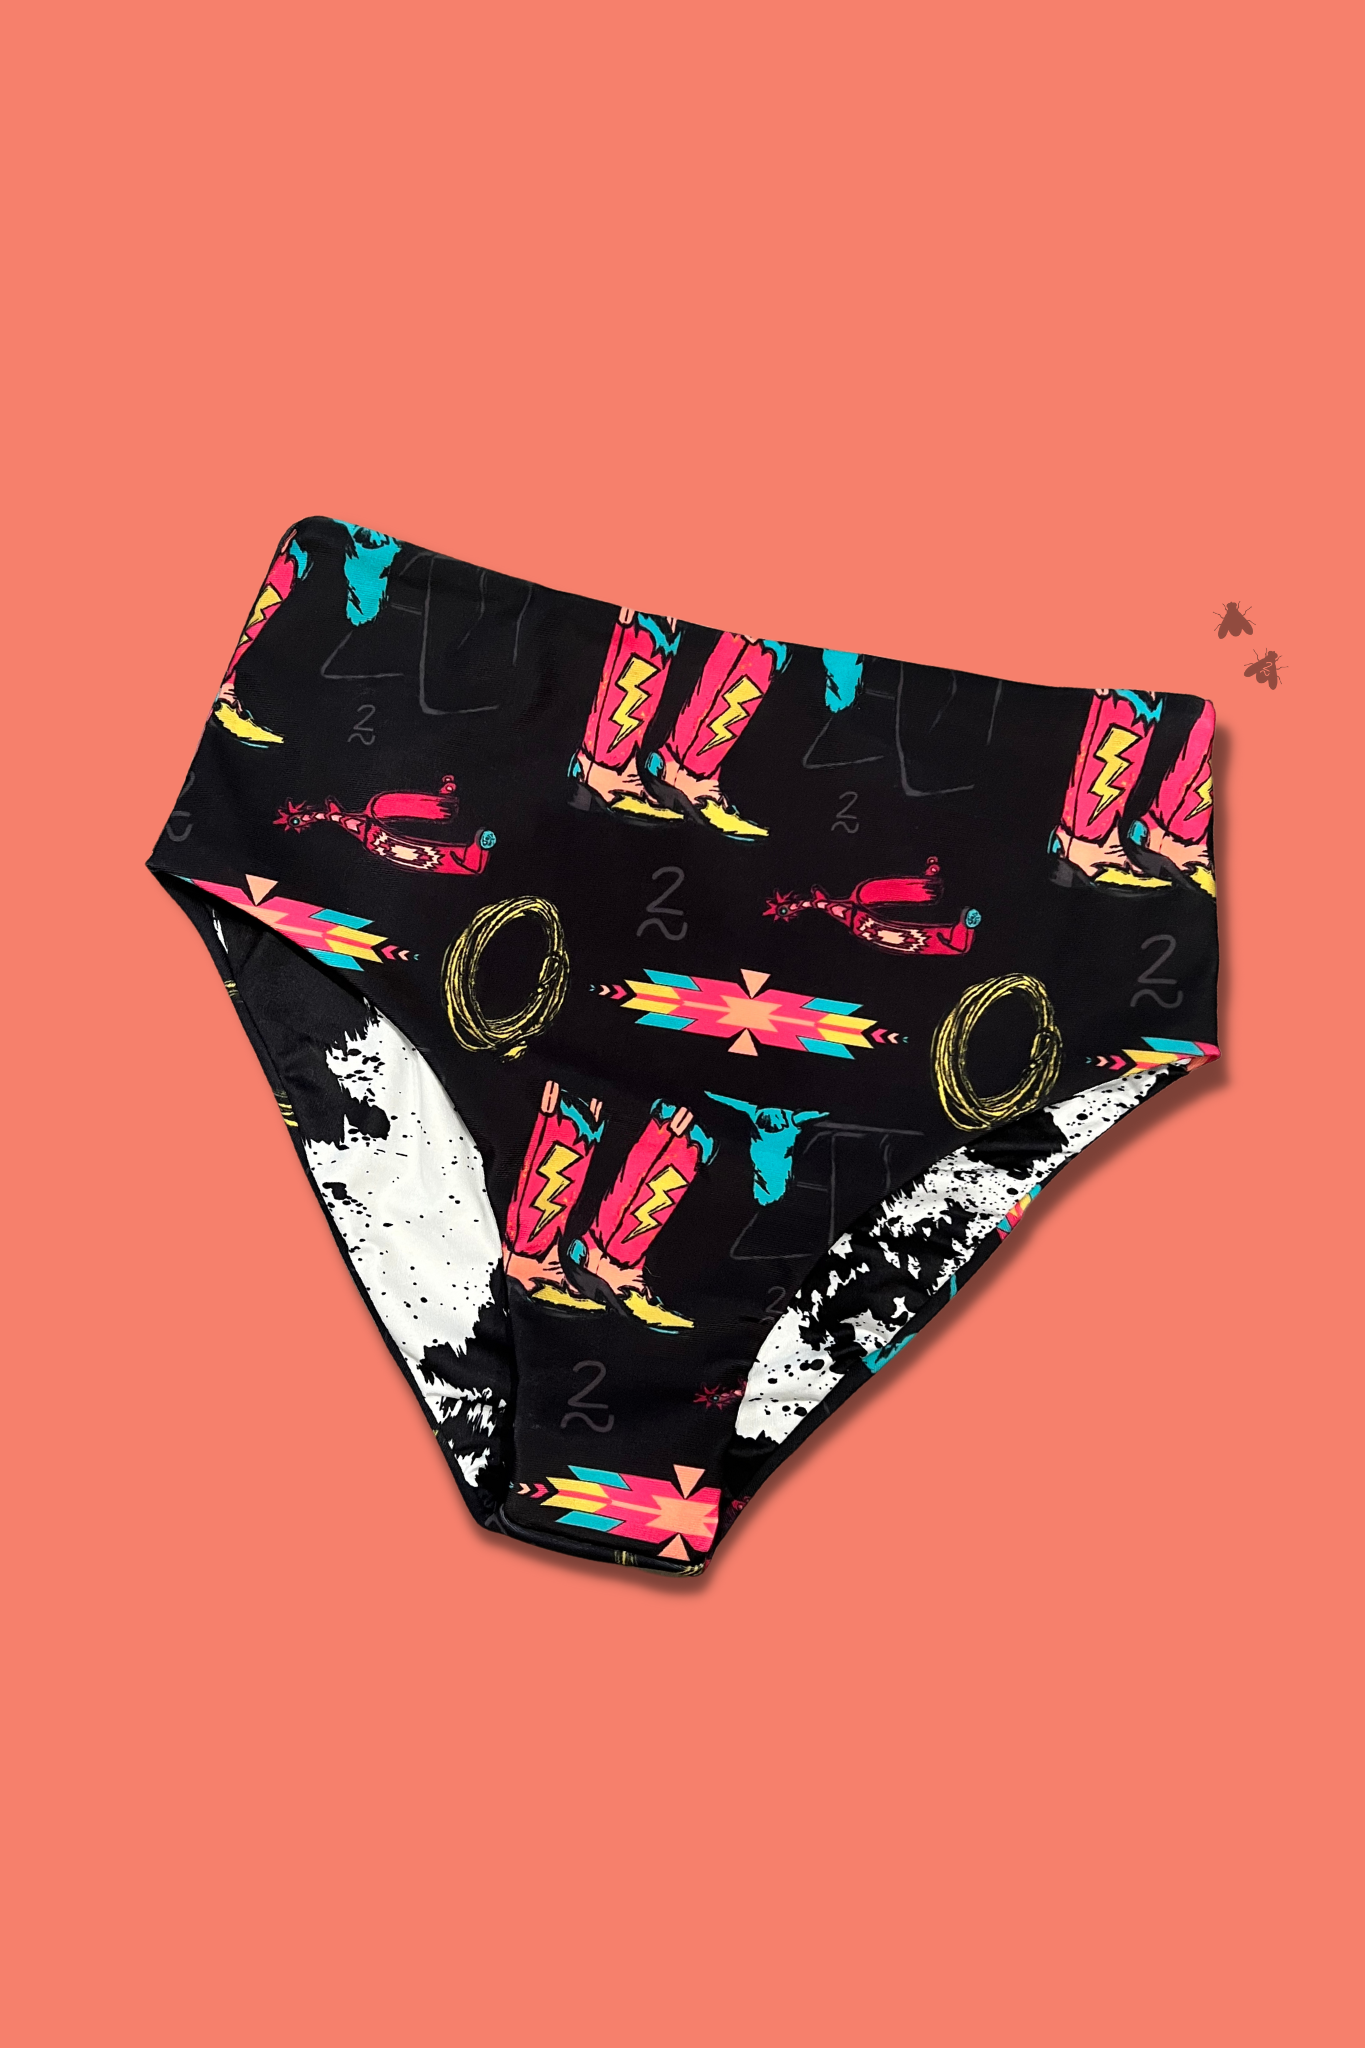 the Rope the |Neon| lights {womens bottoms}